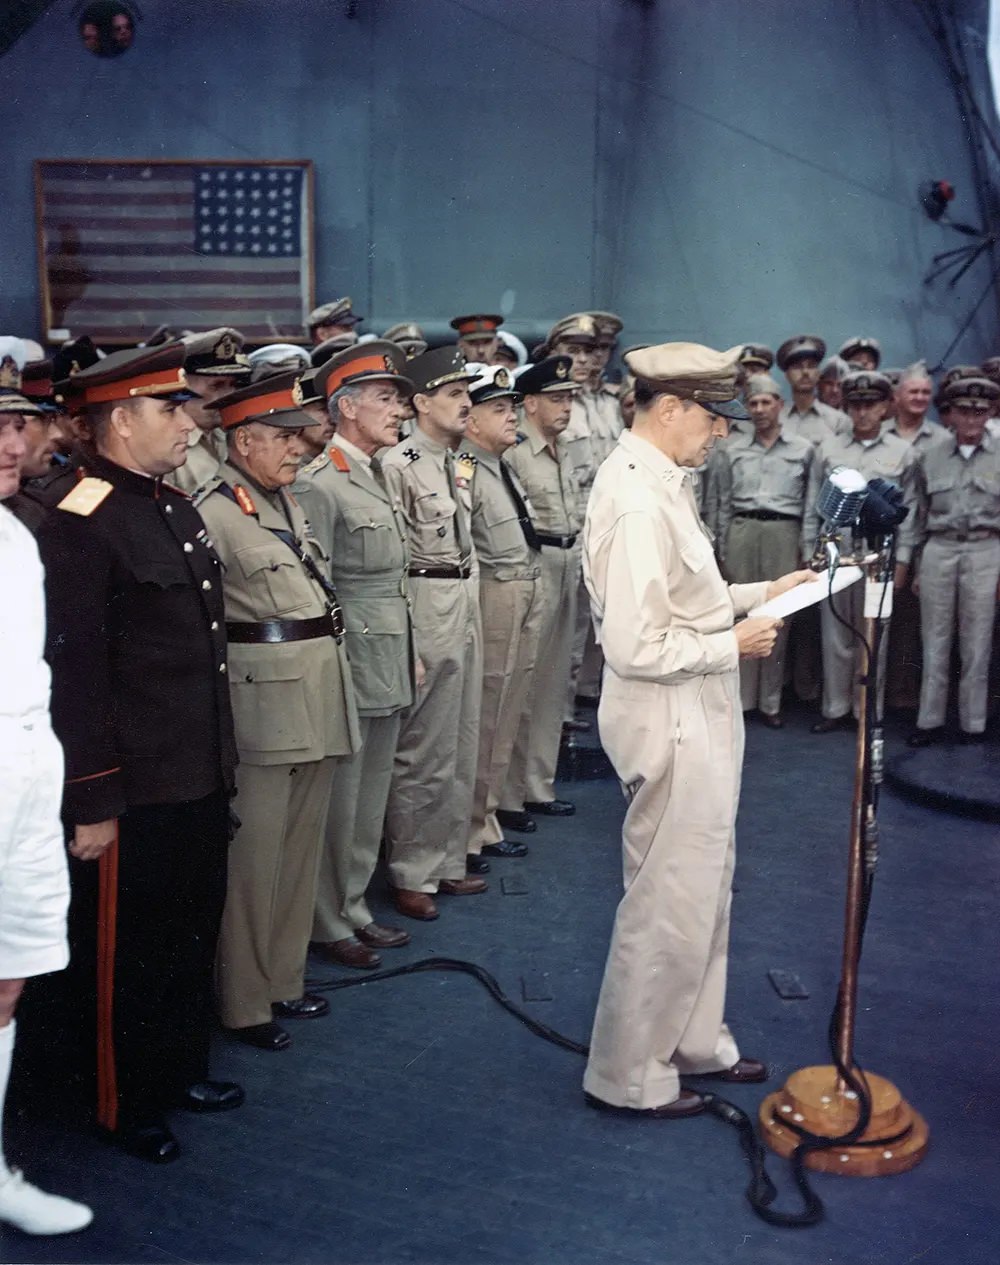 MacArthur at surrender ceremony. The flag flown by Perry is visible in the background.